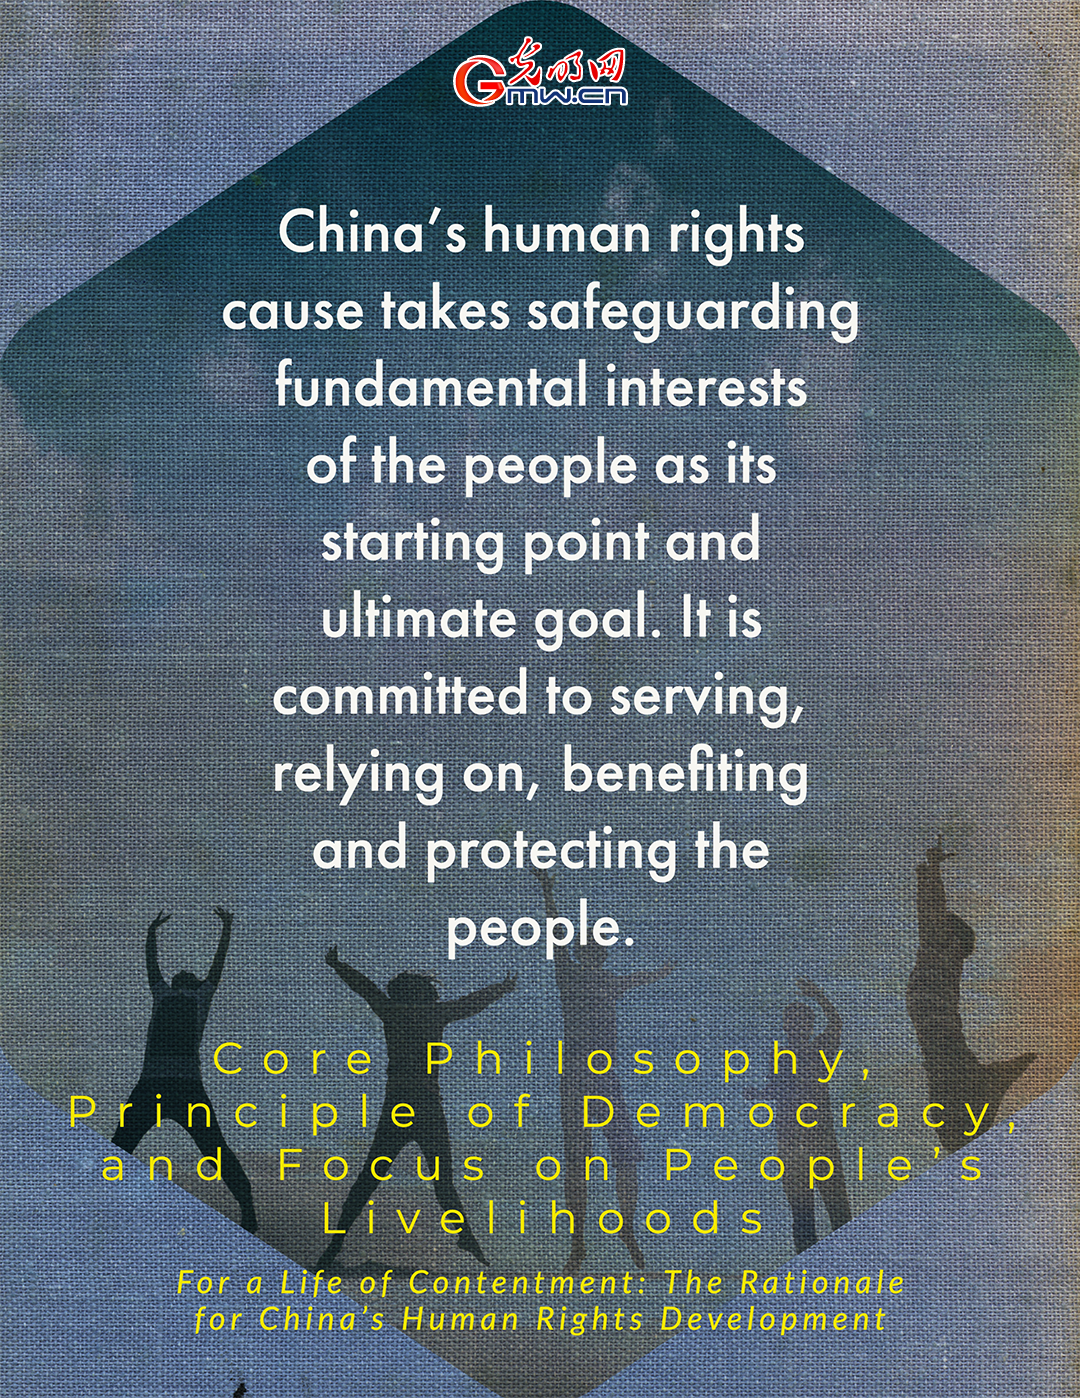 The Rationale and Global Vision of China’s Human Rights Development